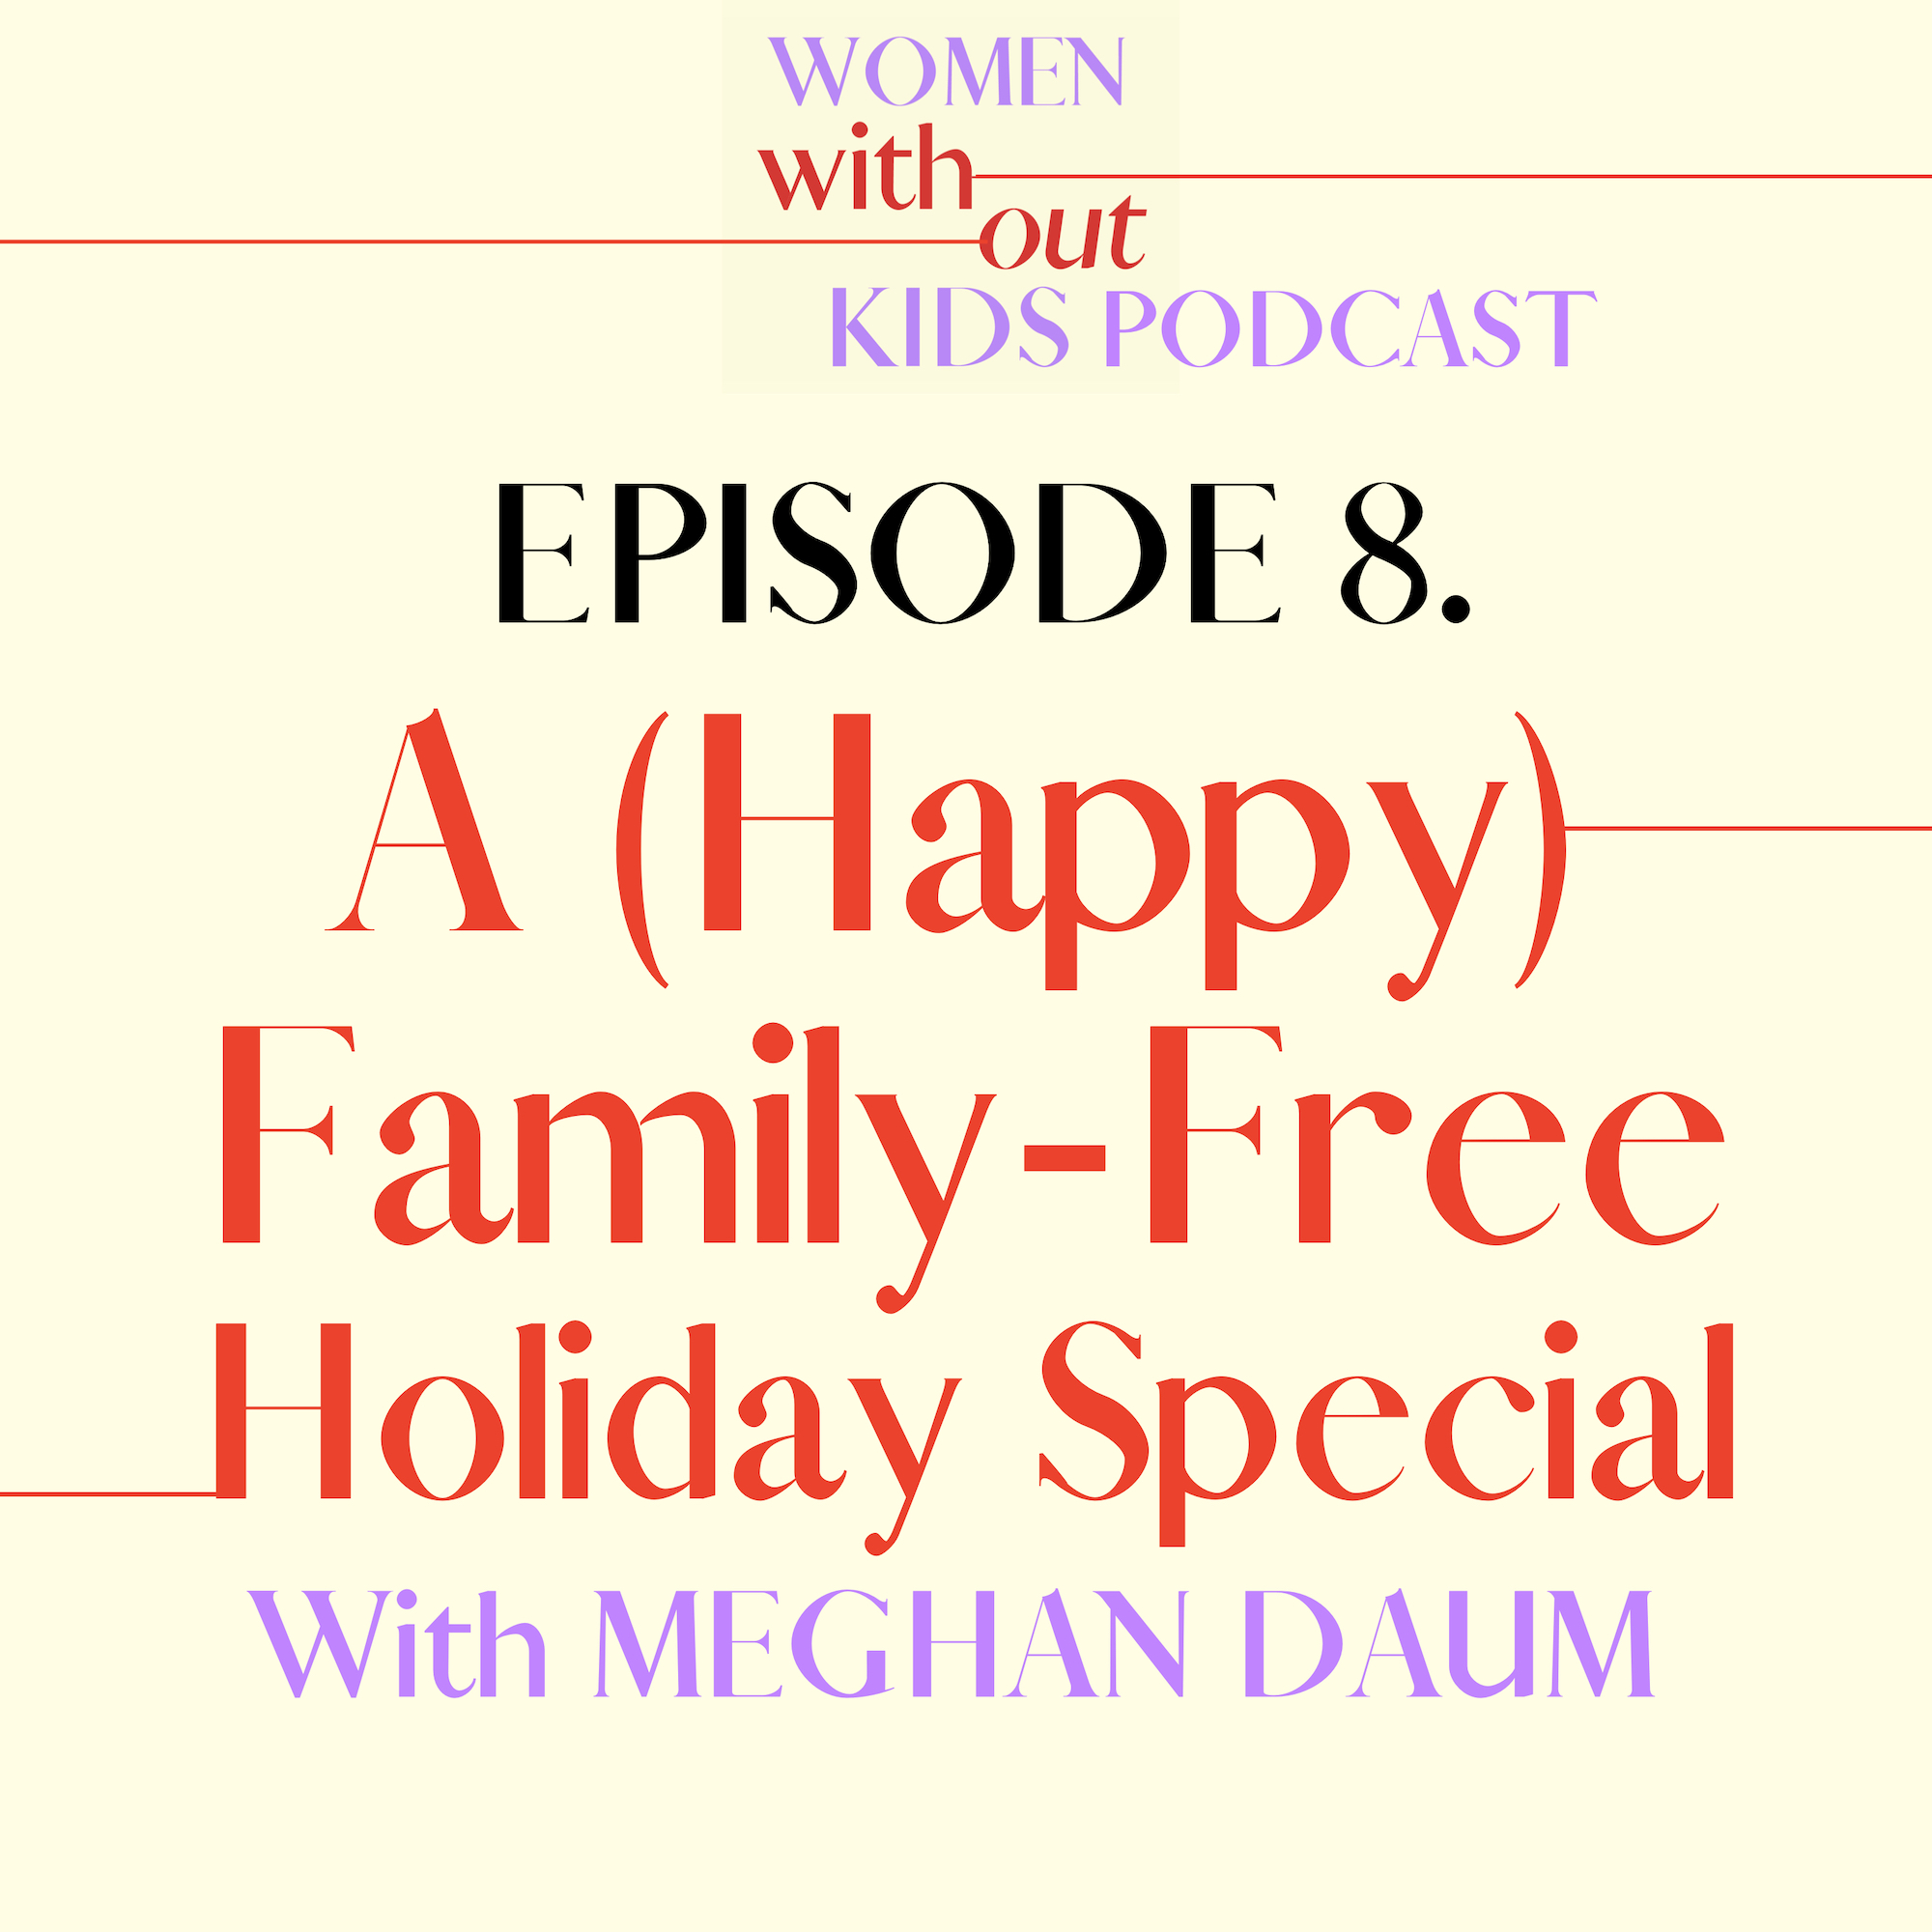 Meghan Daum women without kids podcast family-free holidays